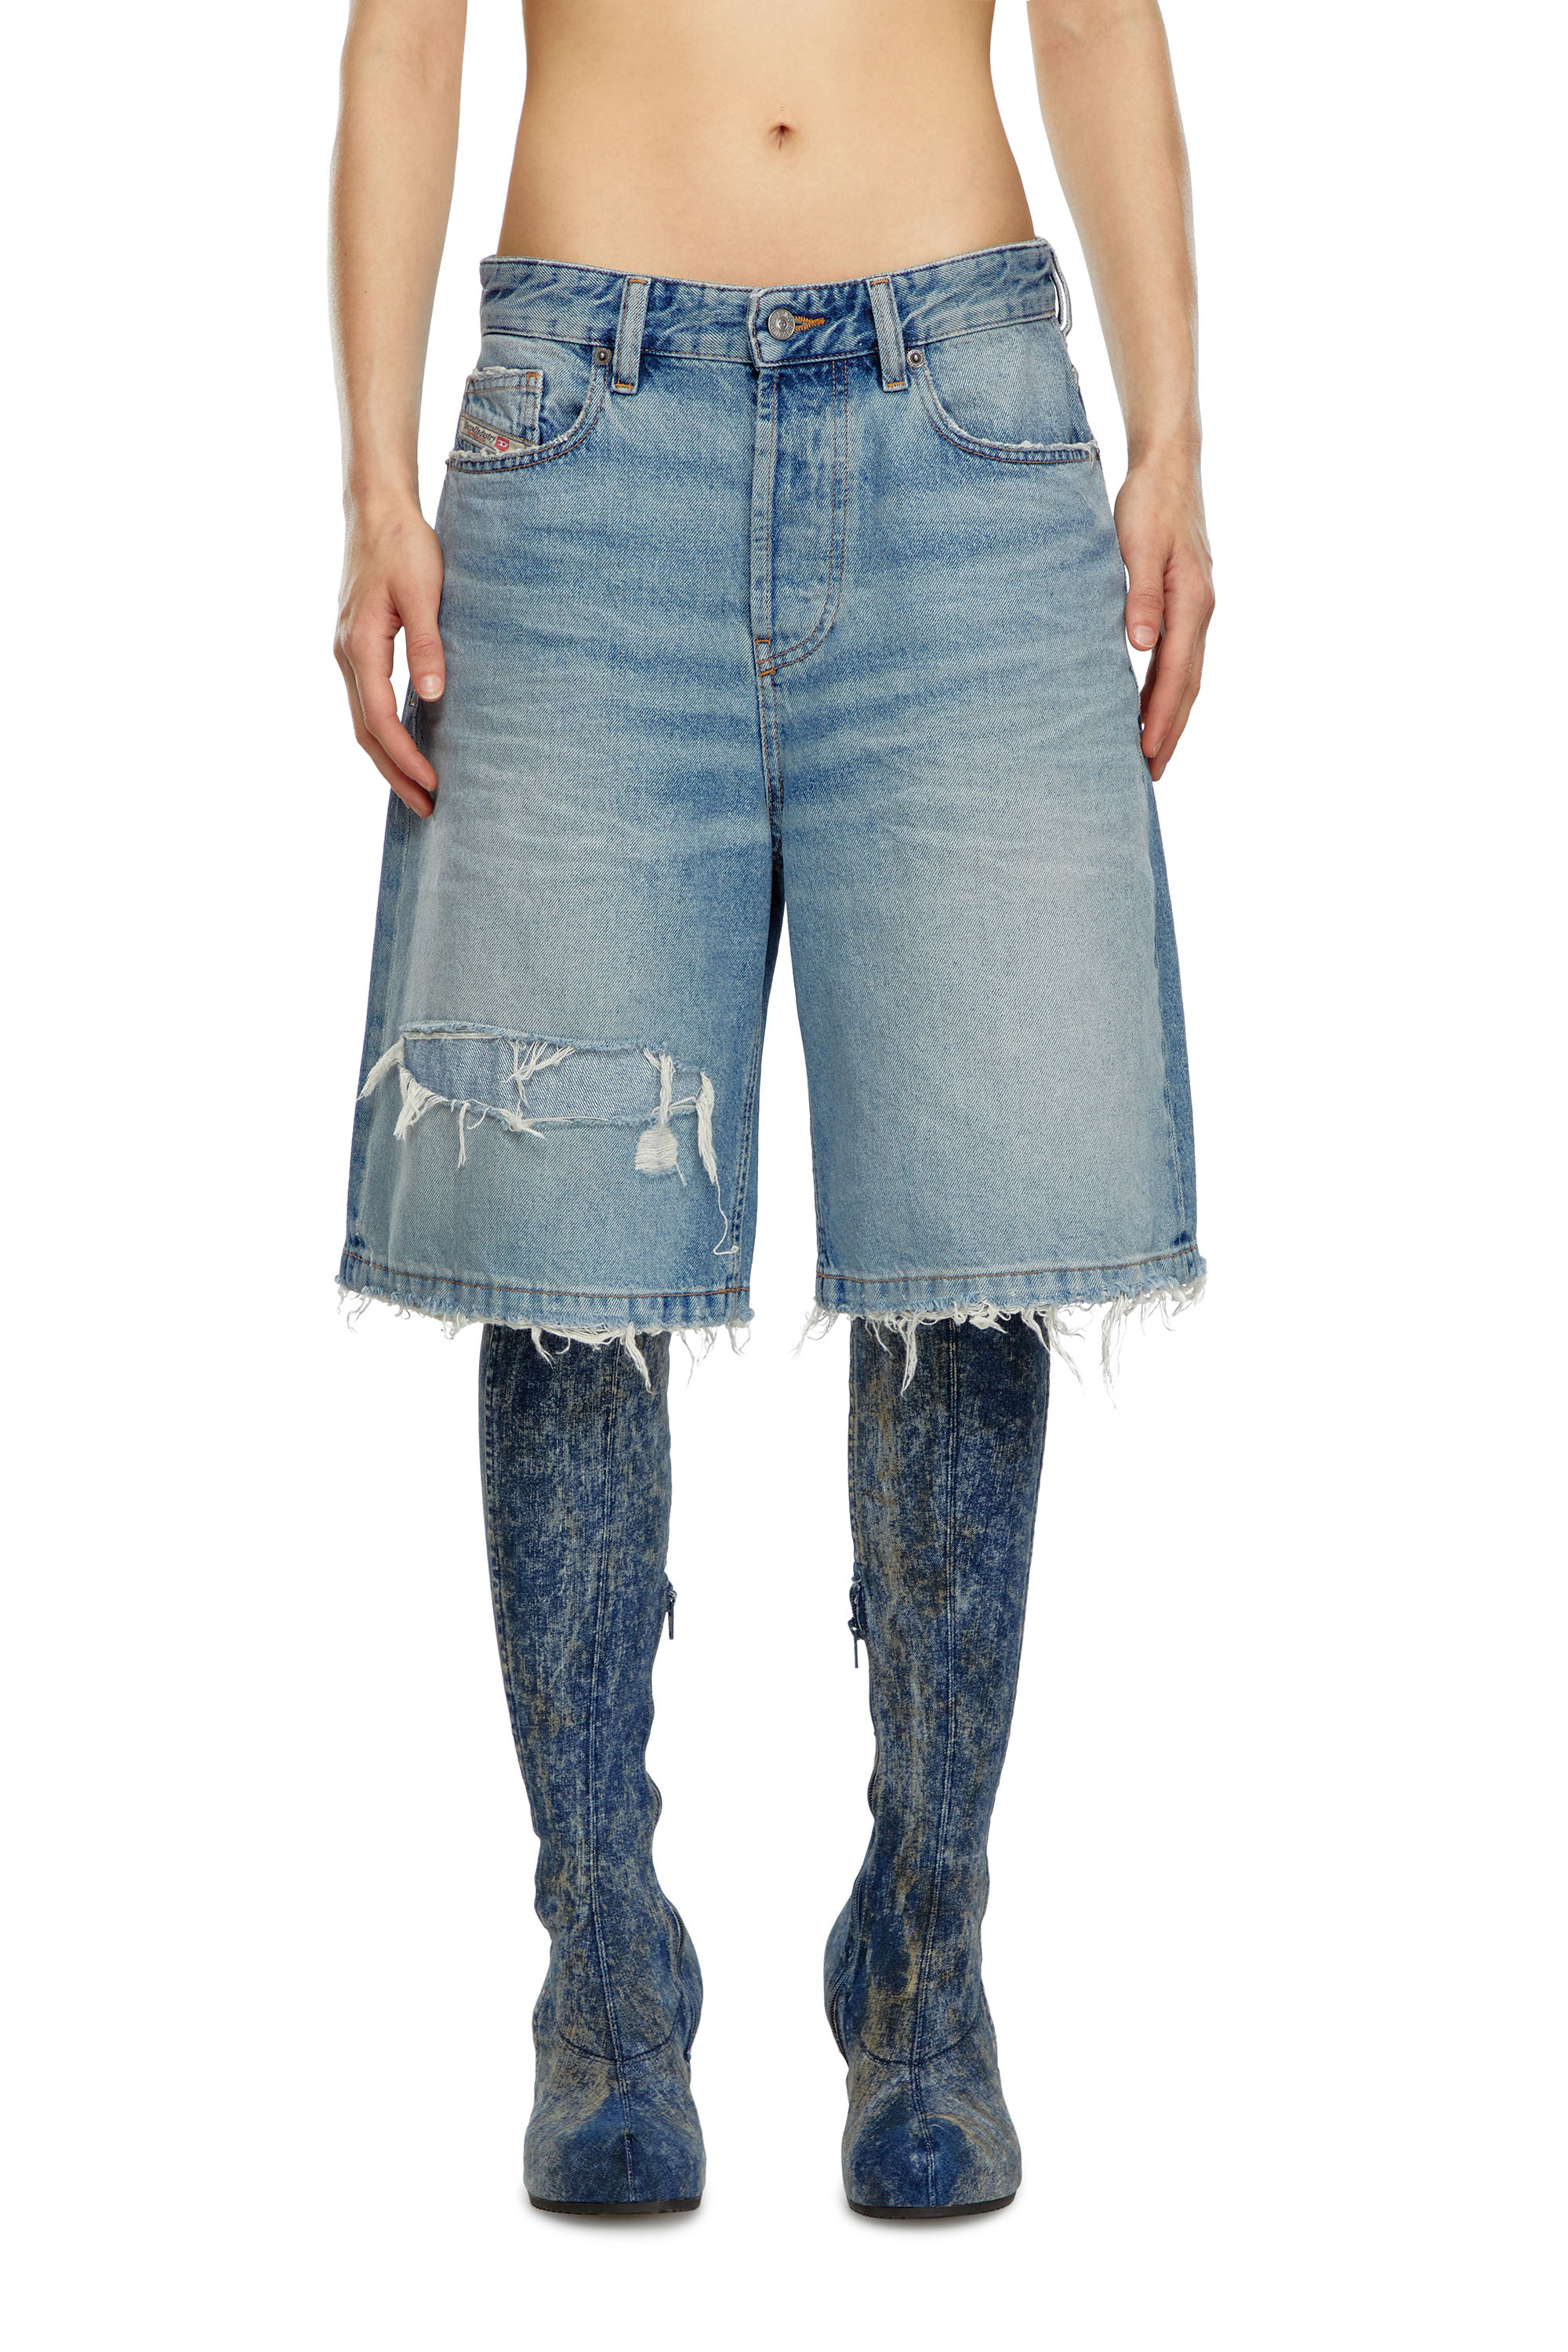 Diesel - DE-SIRE-SHORT, Donna Short in denim ripped and repaired in Blu - Image 3